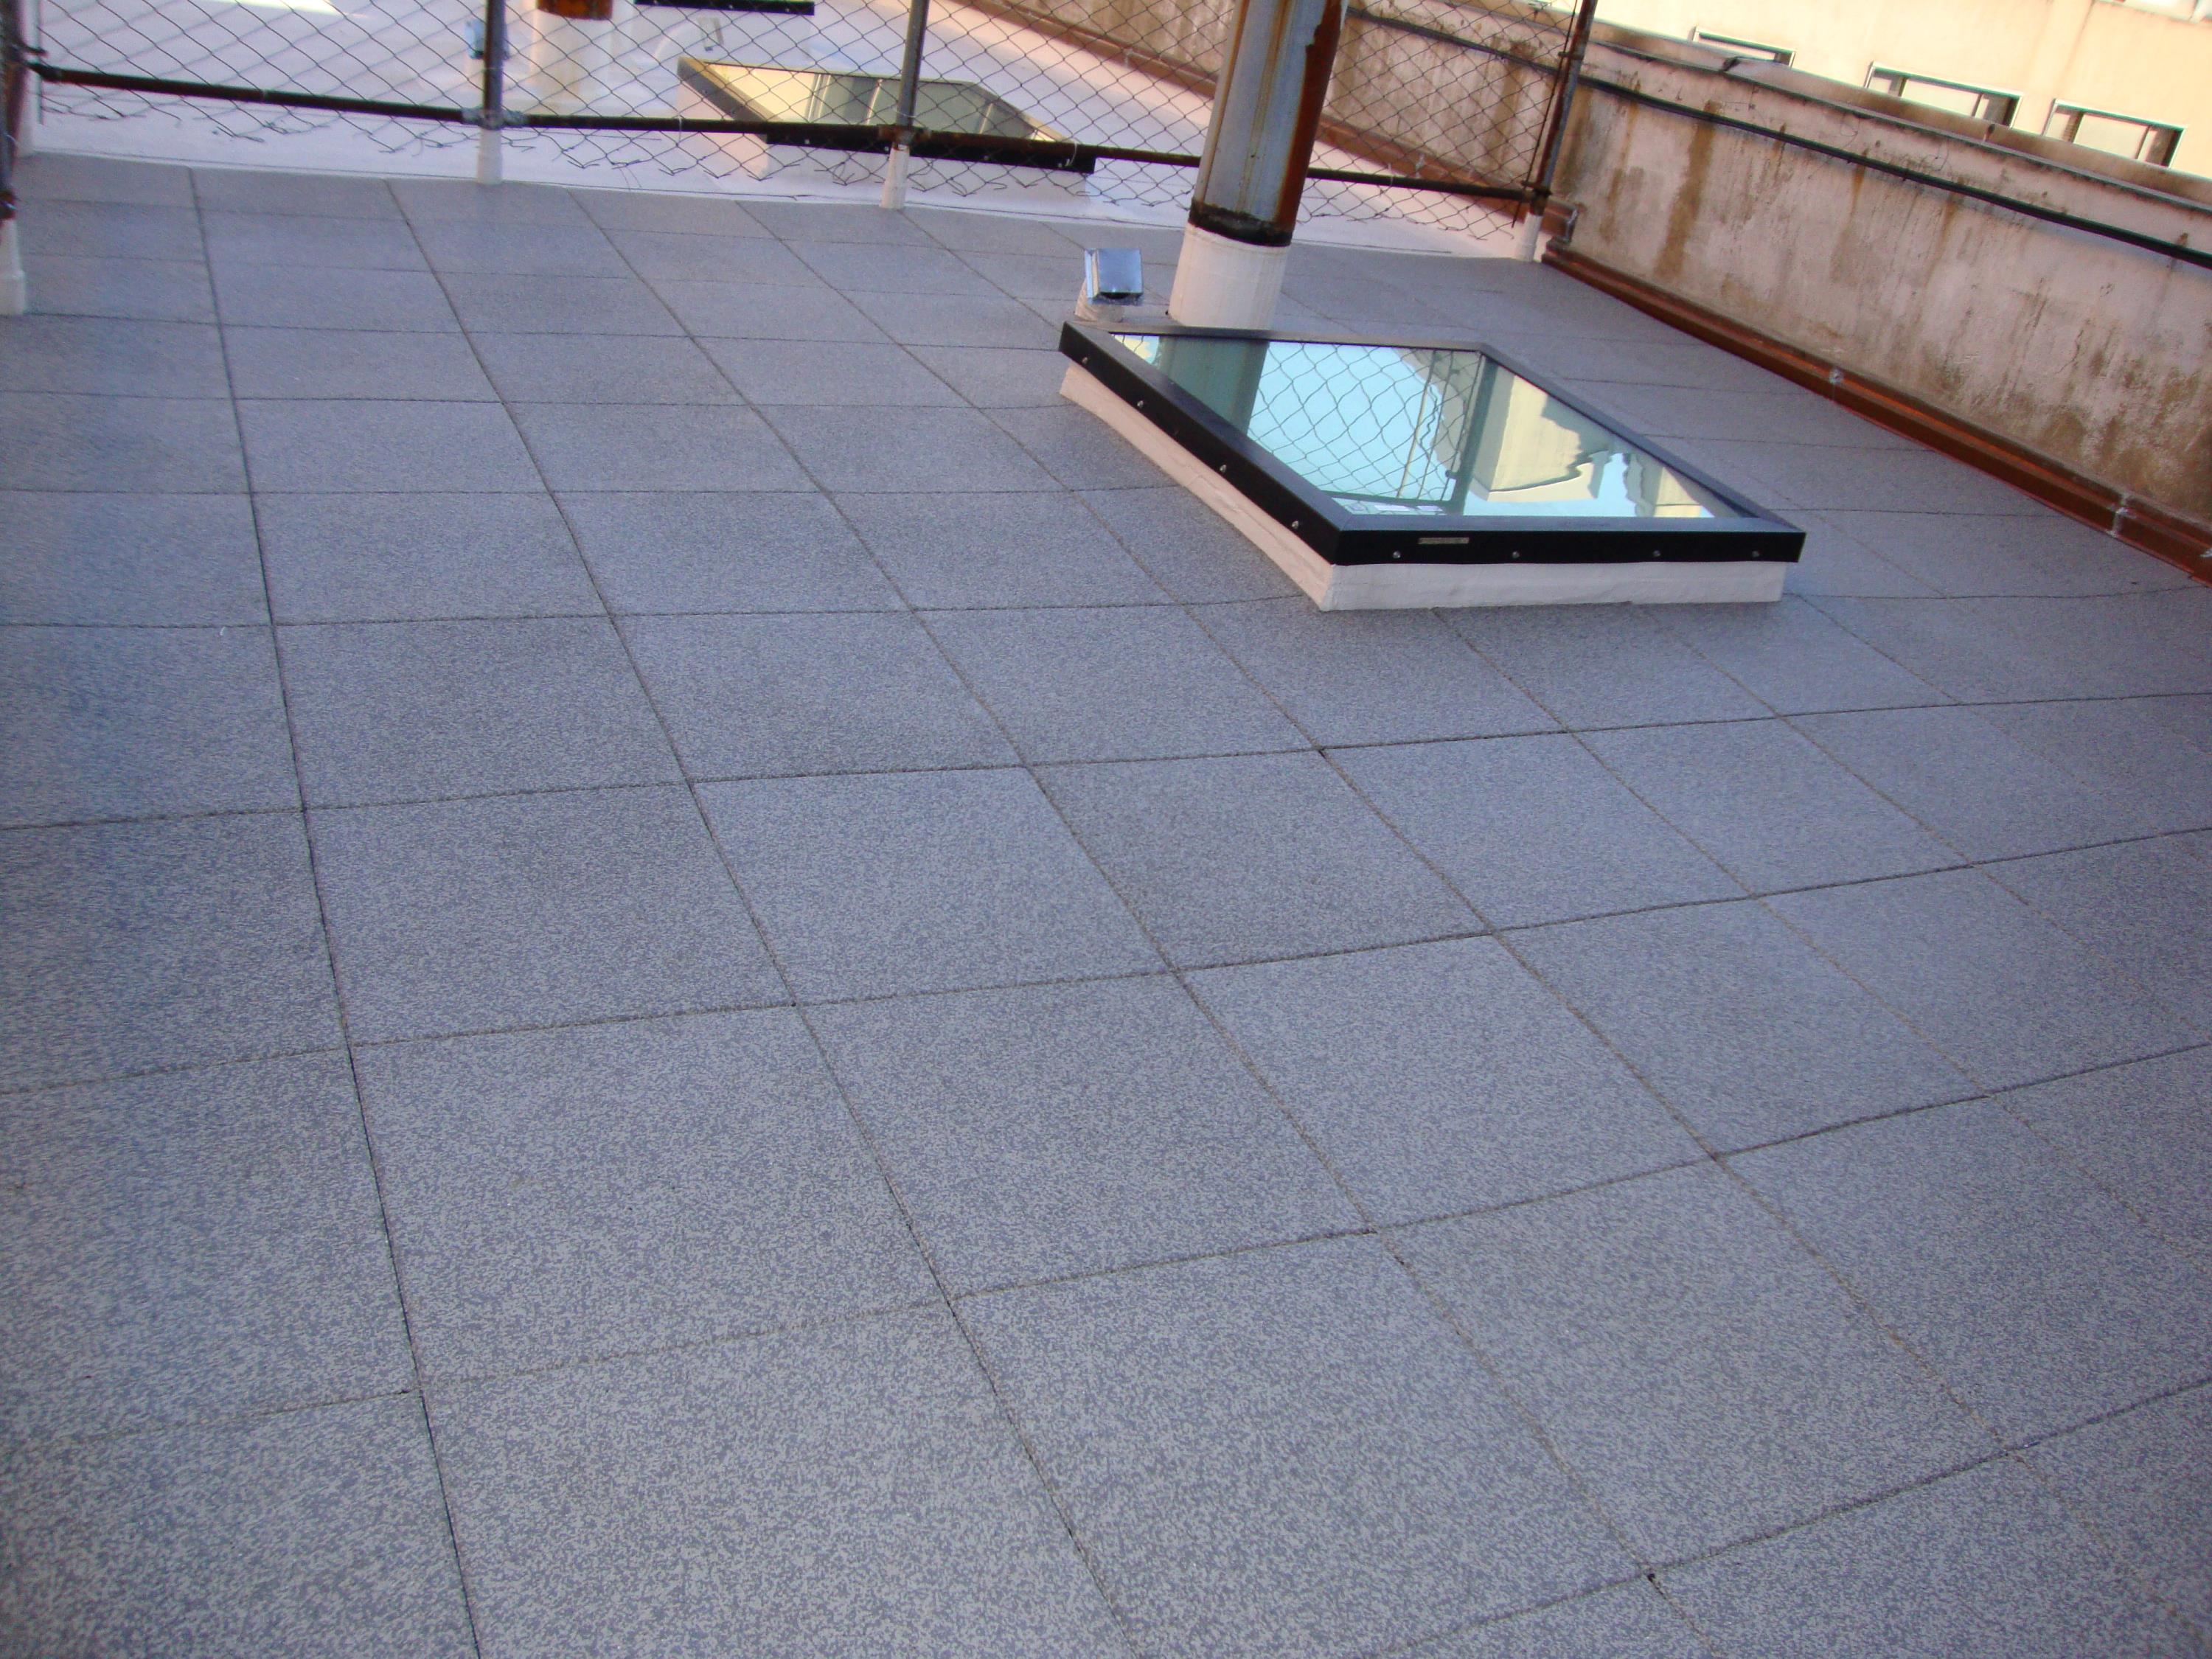 UNITY - Rooftop Patio Pavers on this Condo Complex